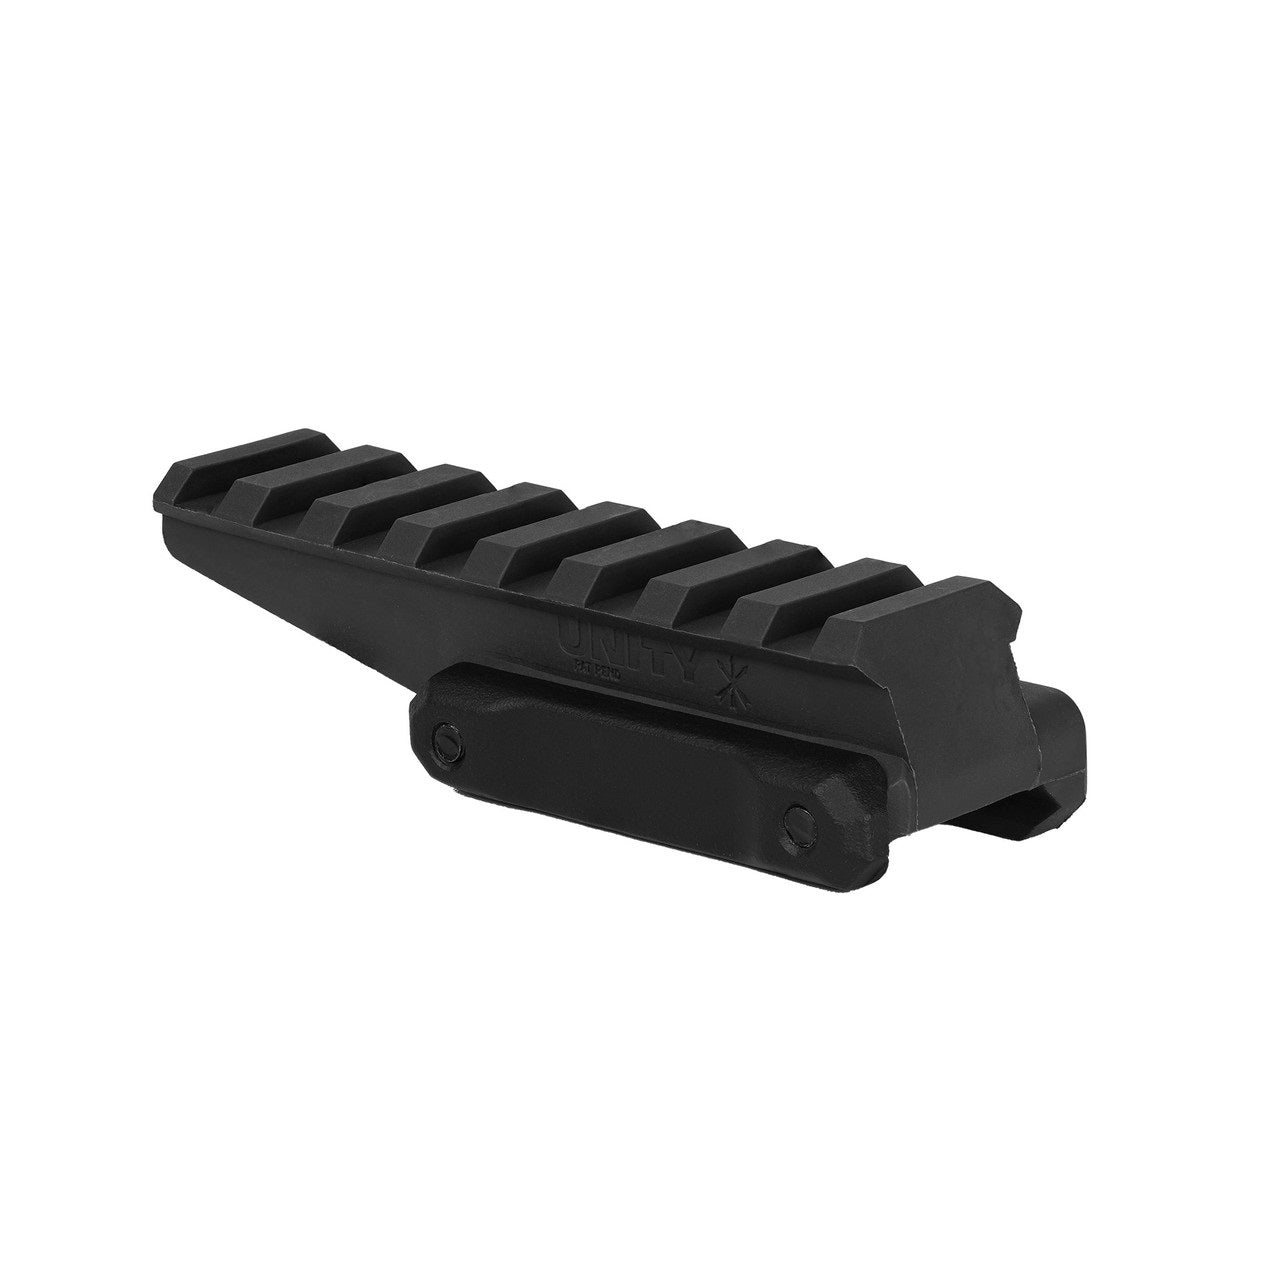 PTS UNITY TACTICAL FAST OPTIC RISER - DUPONT POLYMER - ssairsoft.com